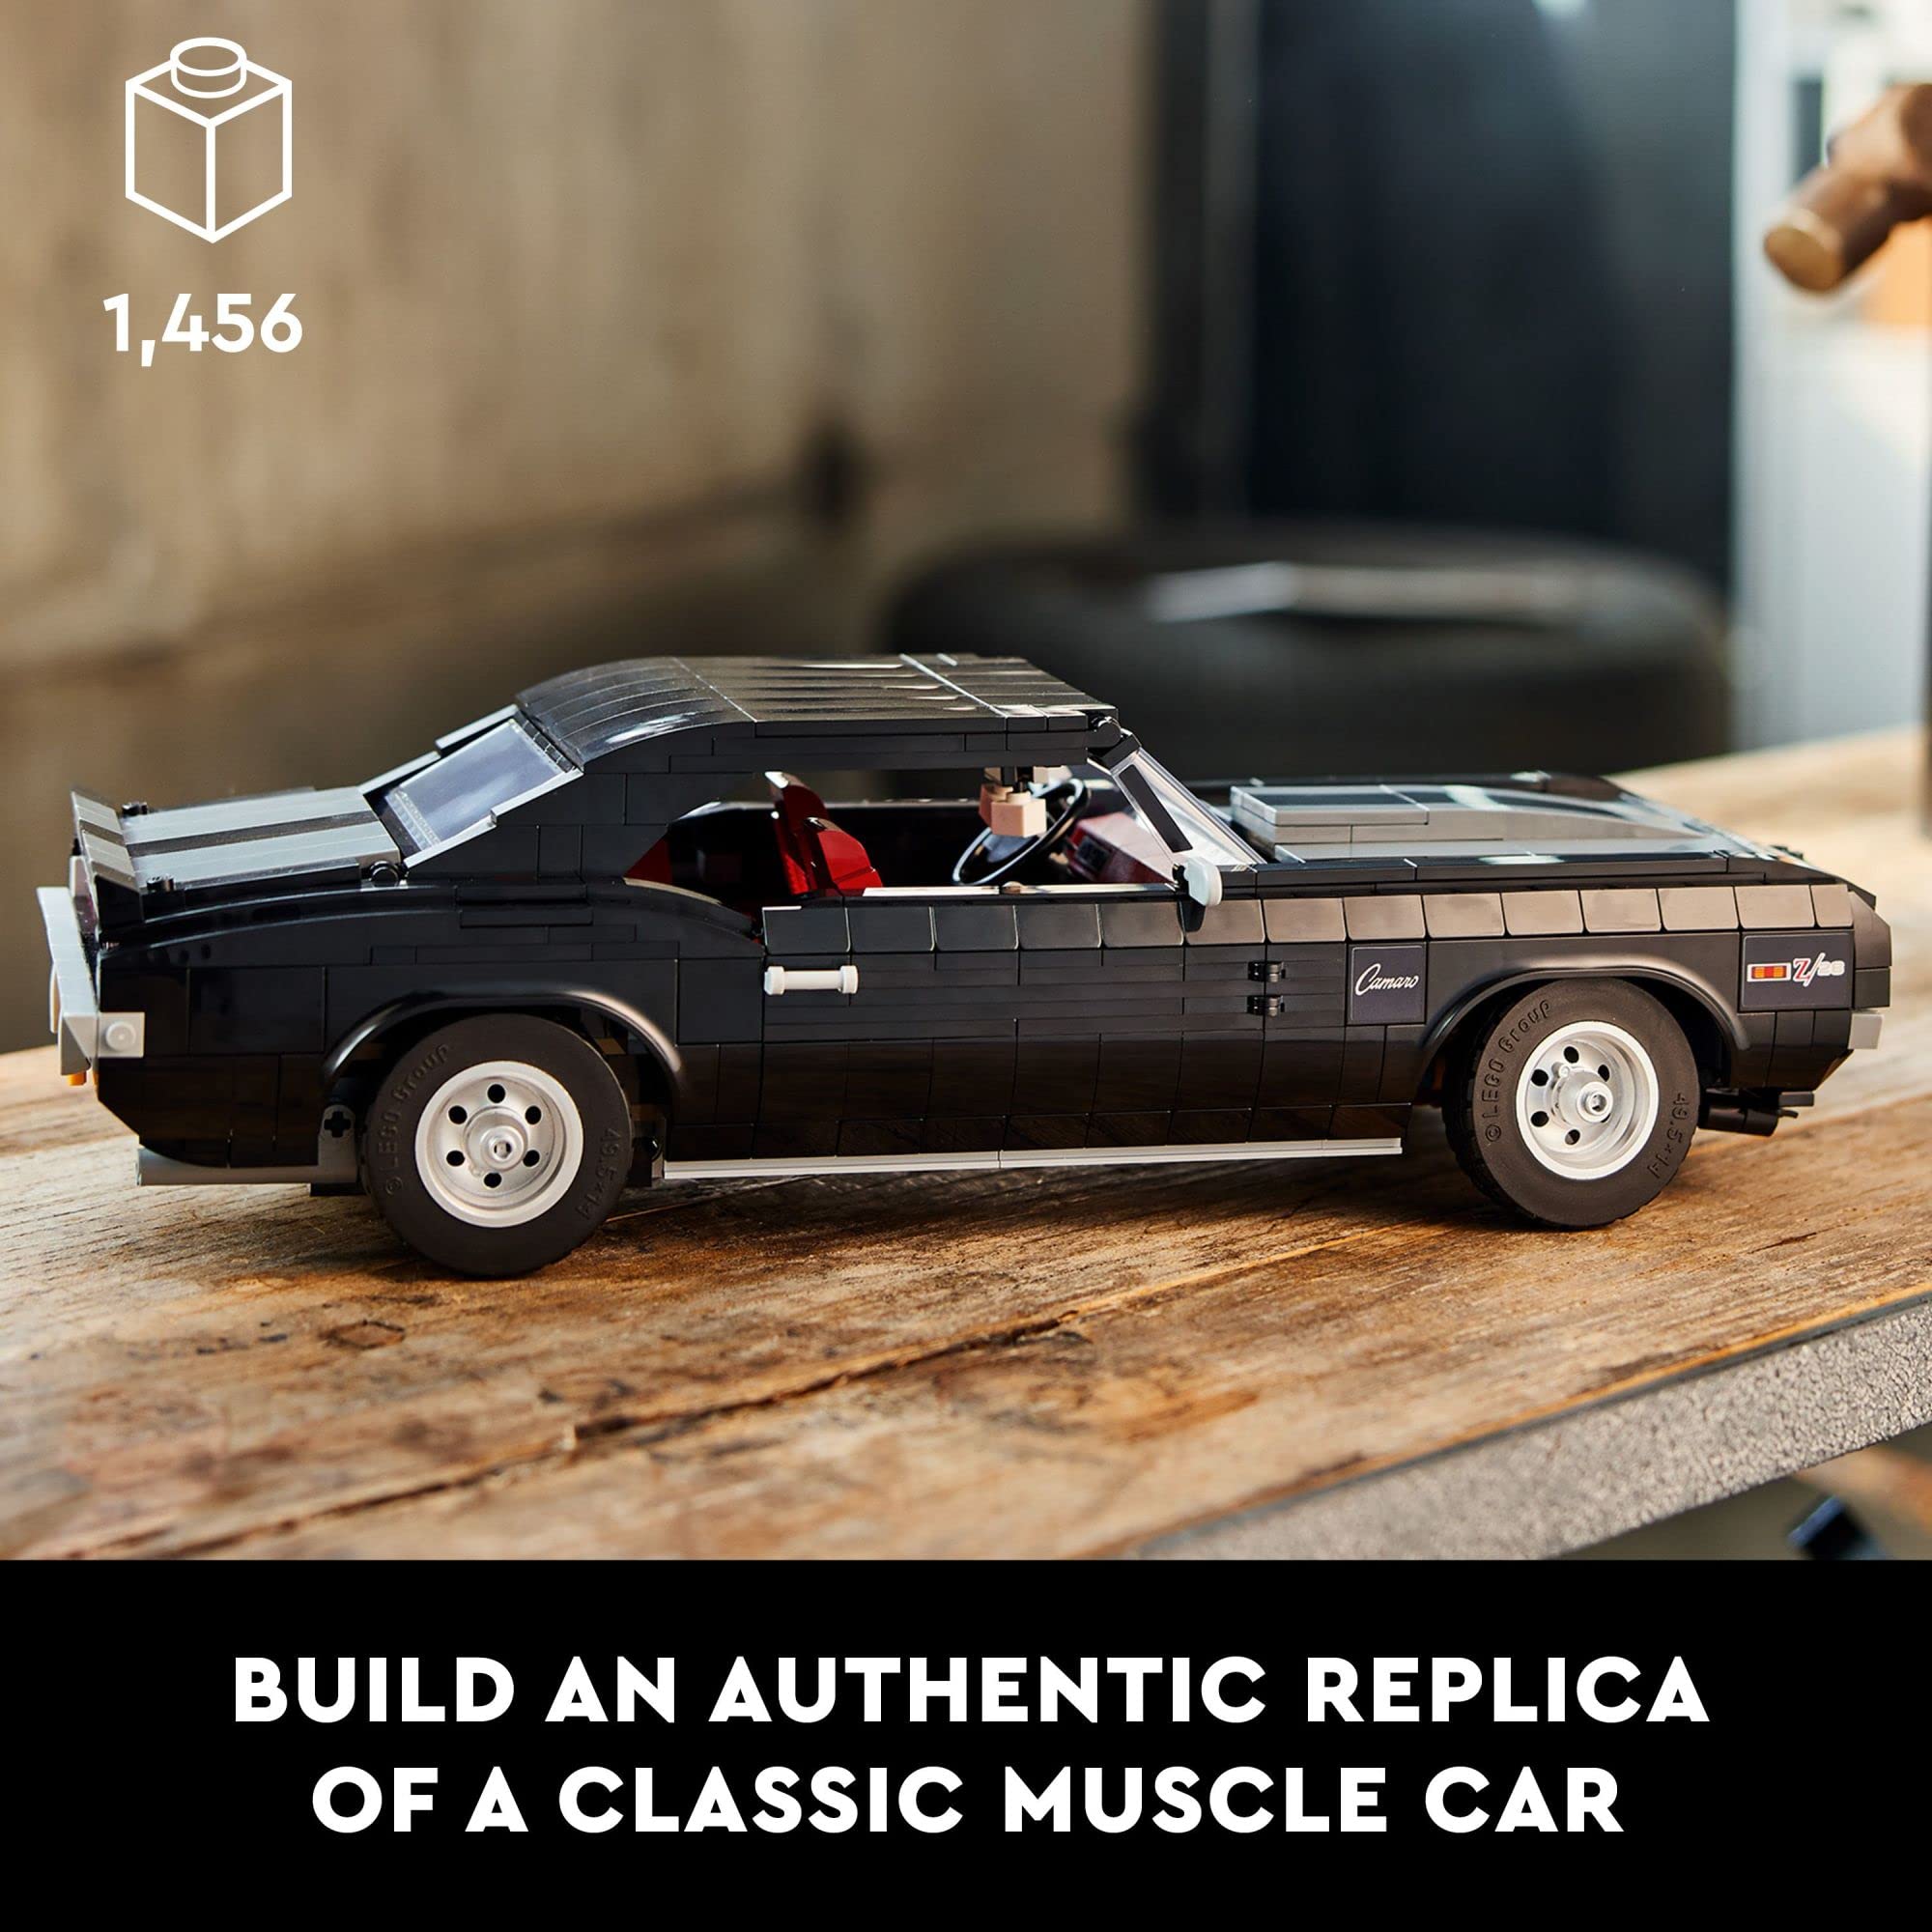 LEGO Icons Chevrolet Camaro Z28 10304, Customizable Classic Car Replica Model Building Kit, 1969 Vintage American Muscle Car, Great Gift Idea for Teens and Adults